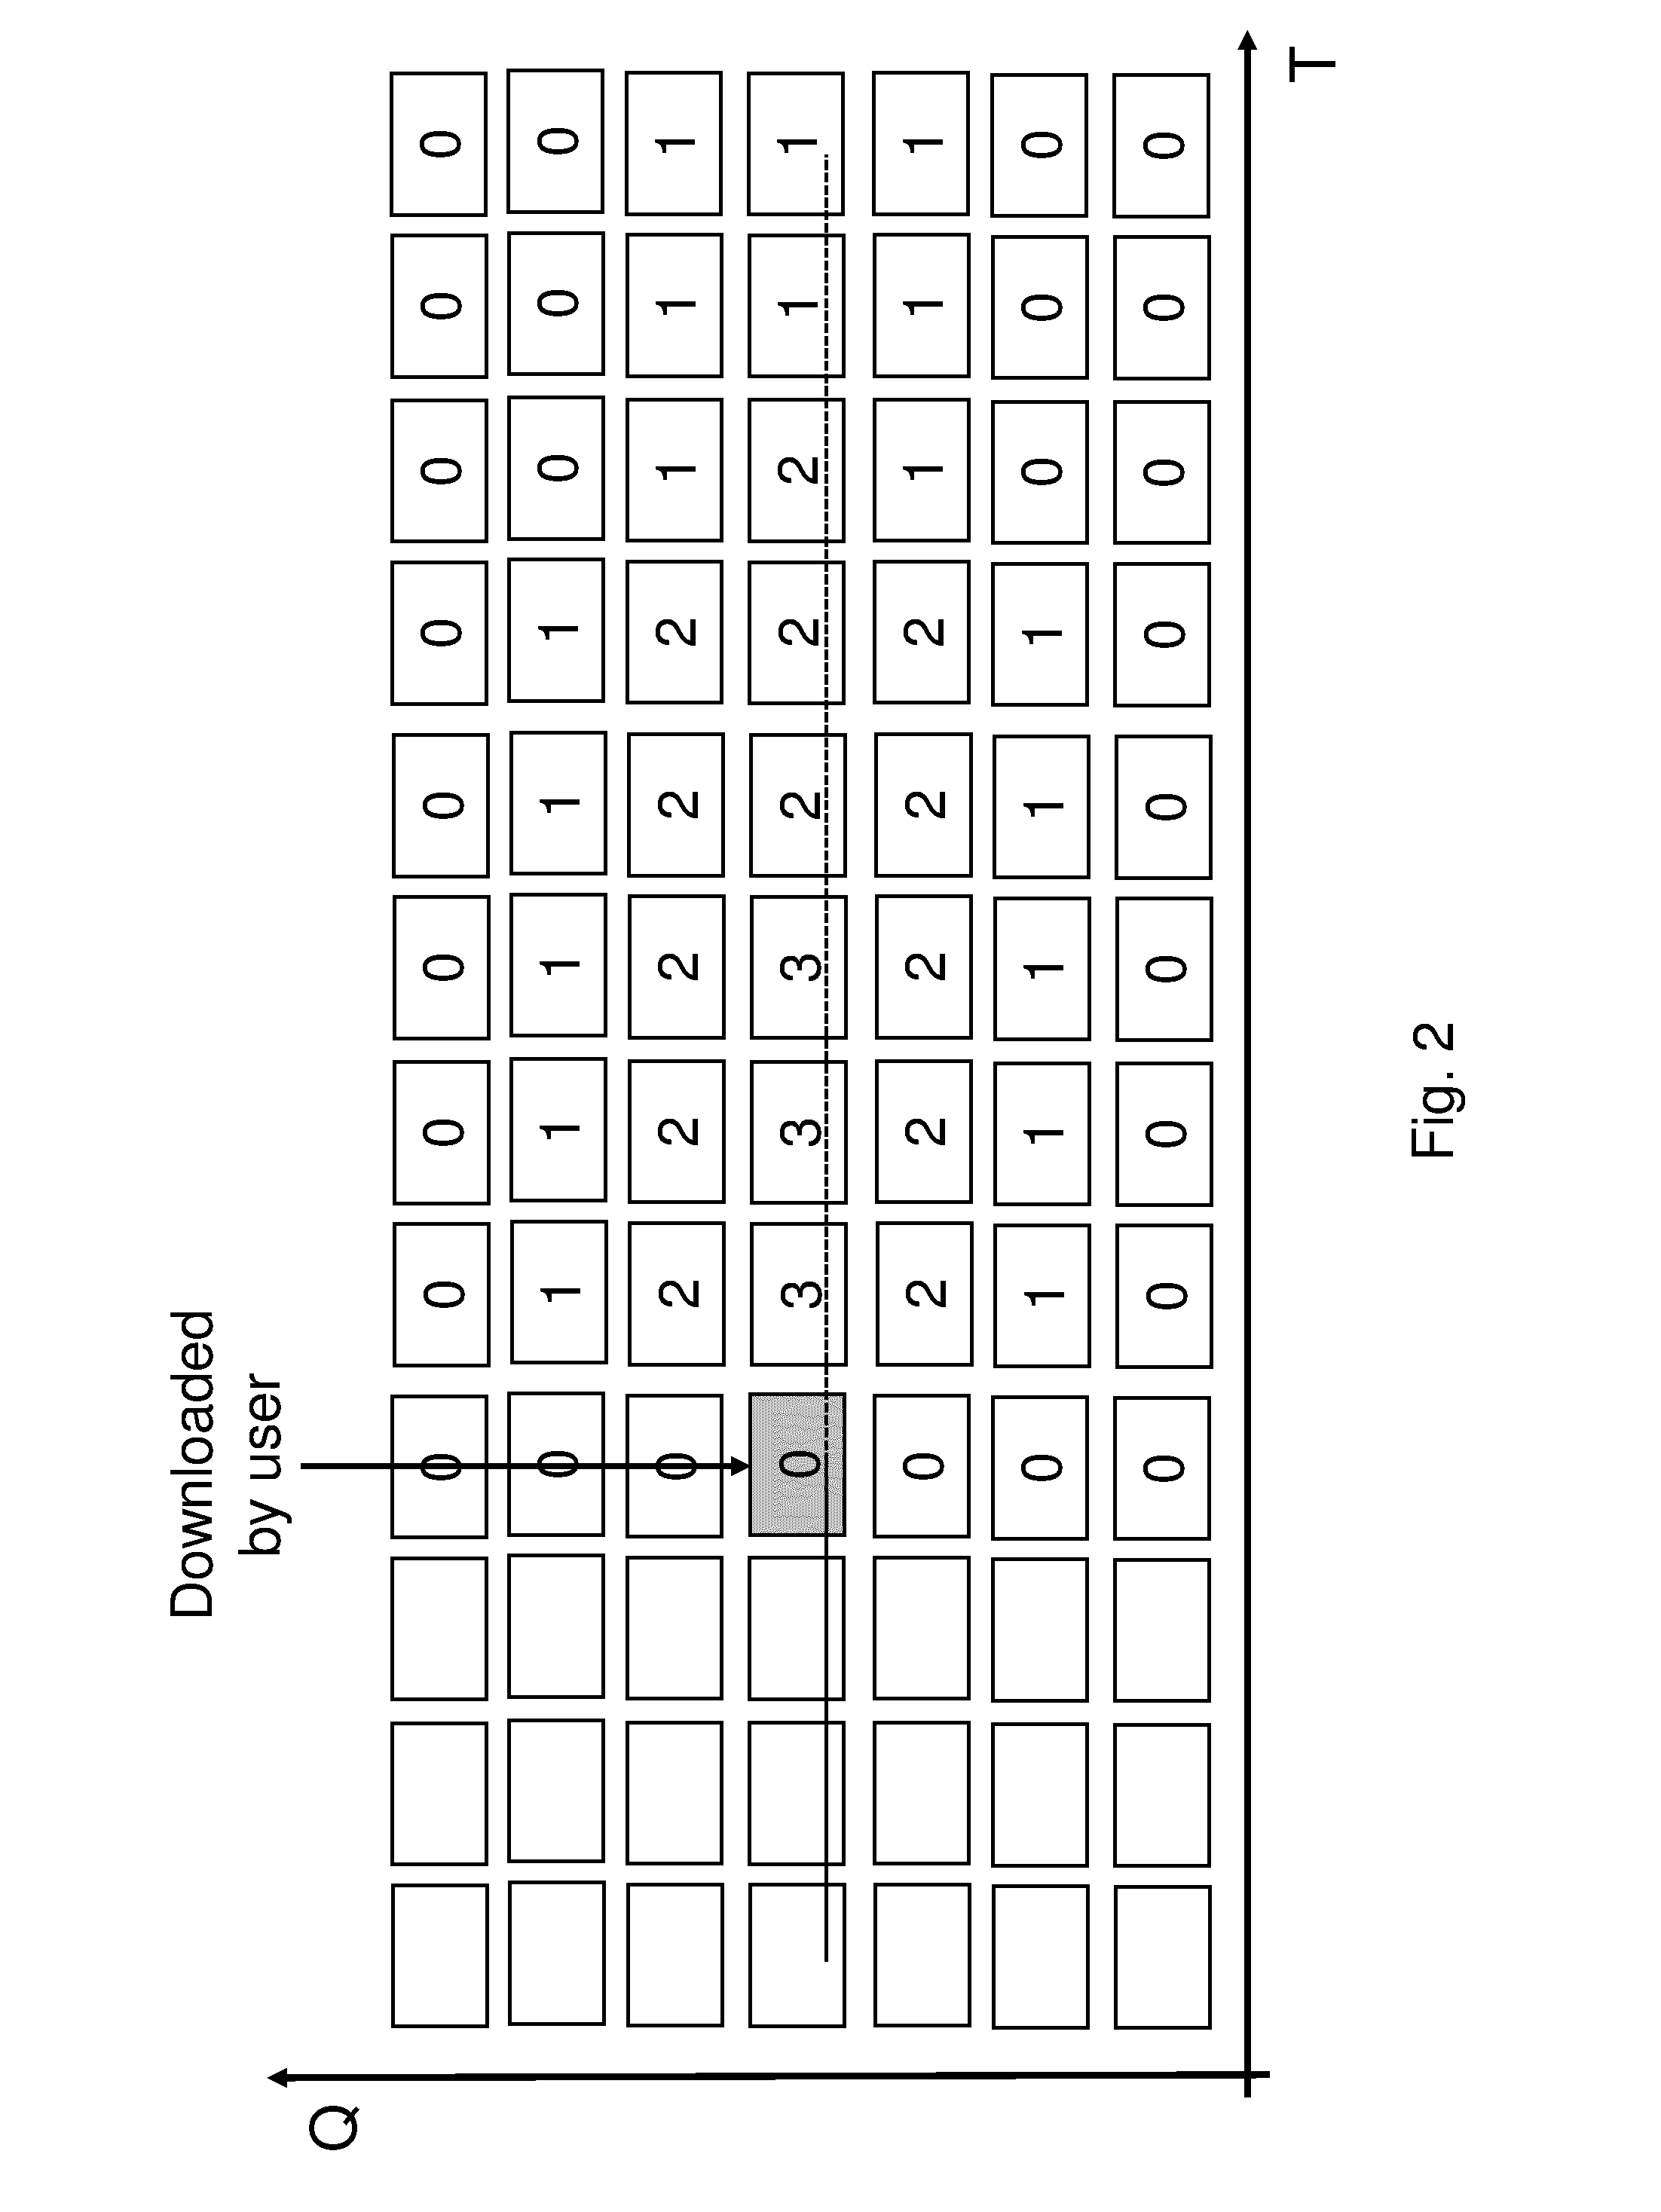 Cache manager for segmented multimedia and corresponding method for cache management